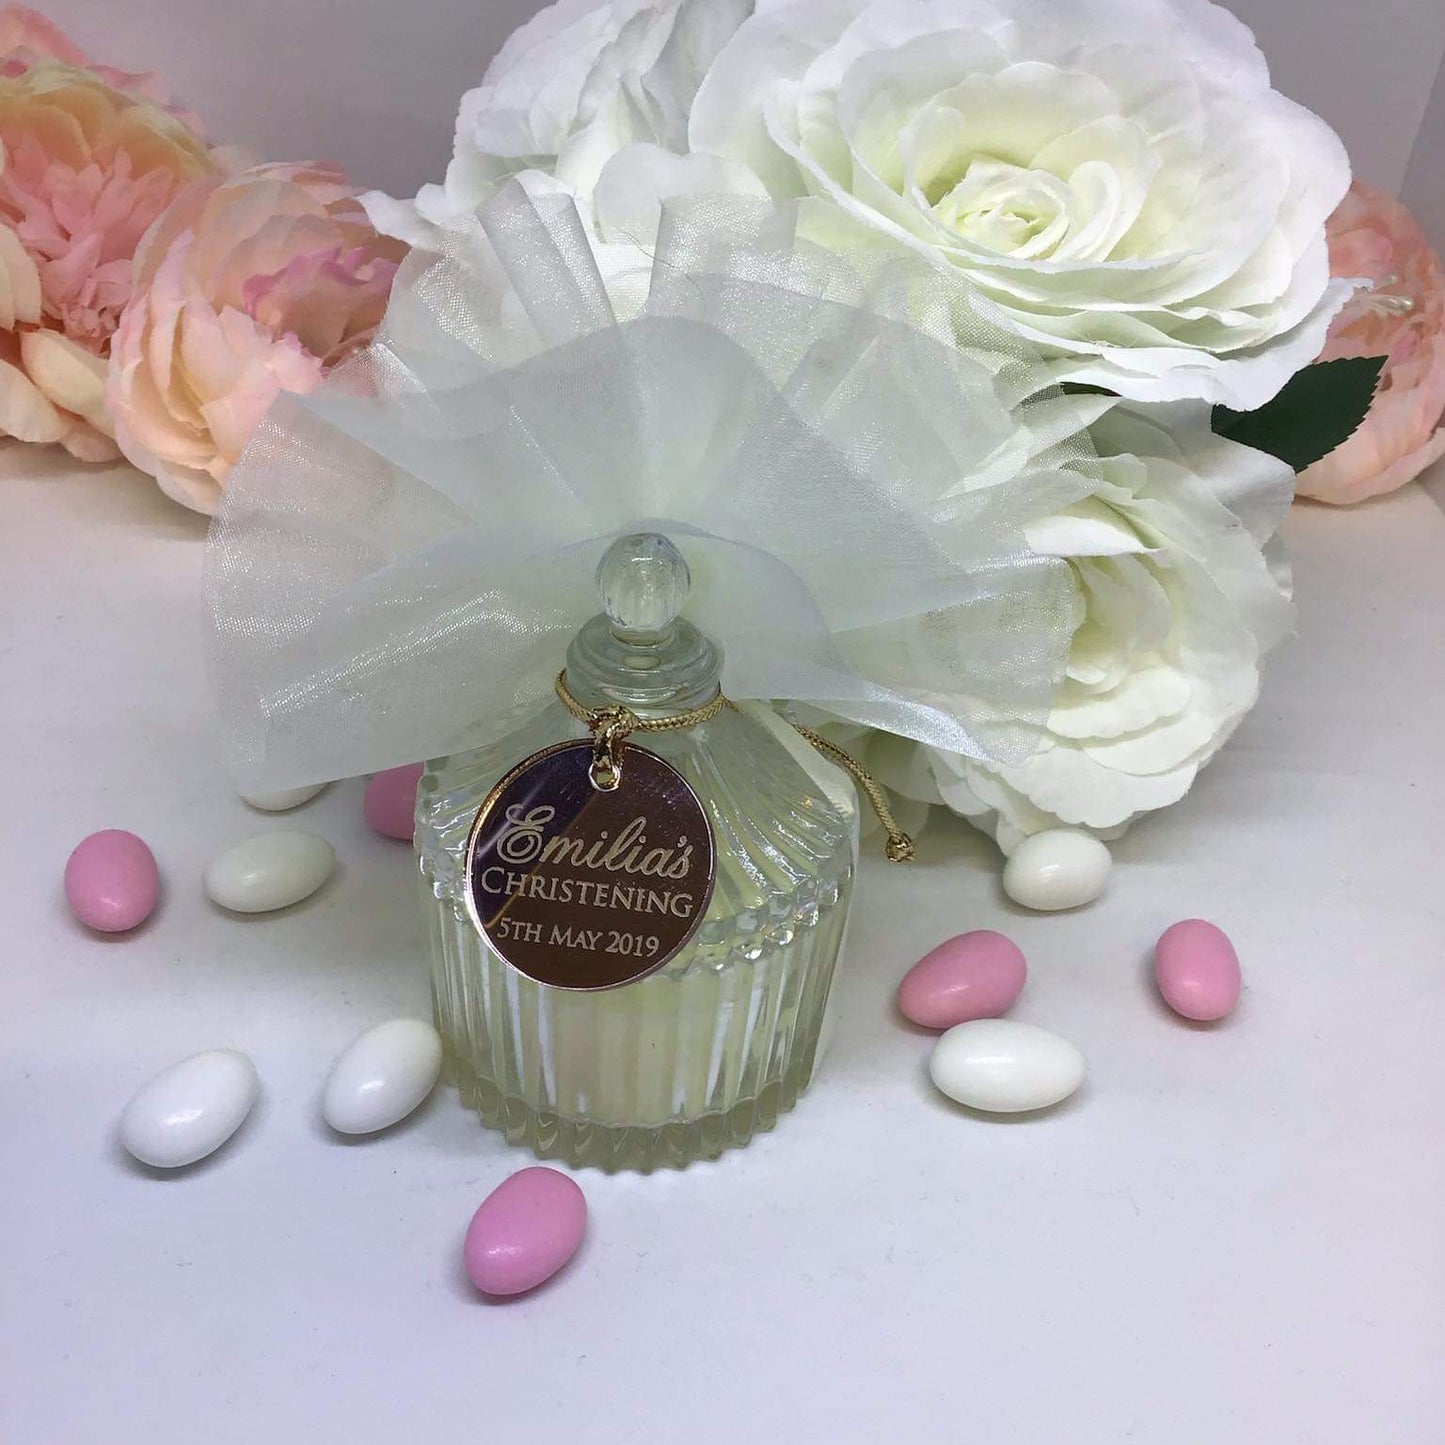 Christening Bomboniere - Candle Jar with personalised tag